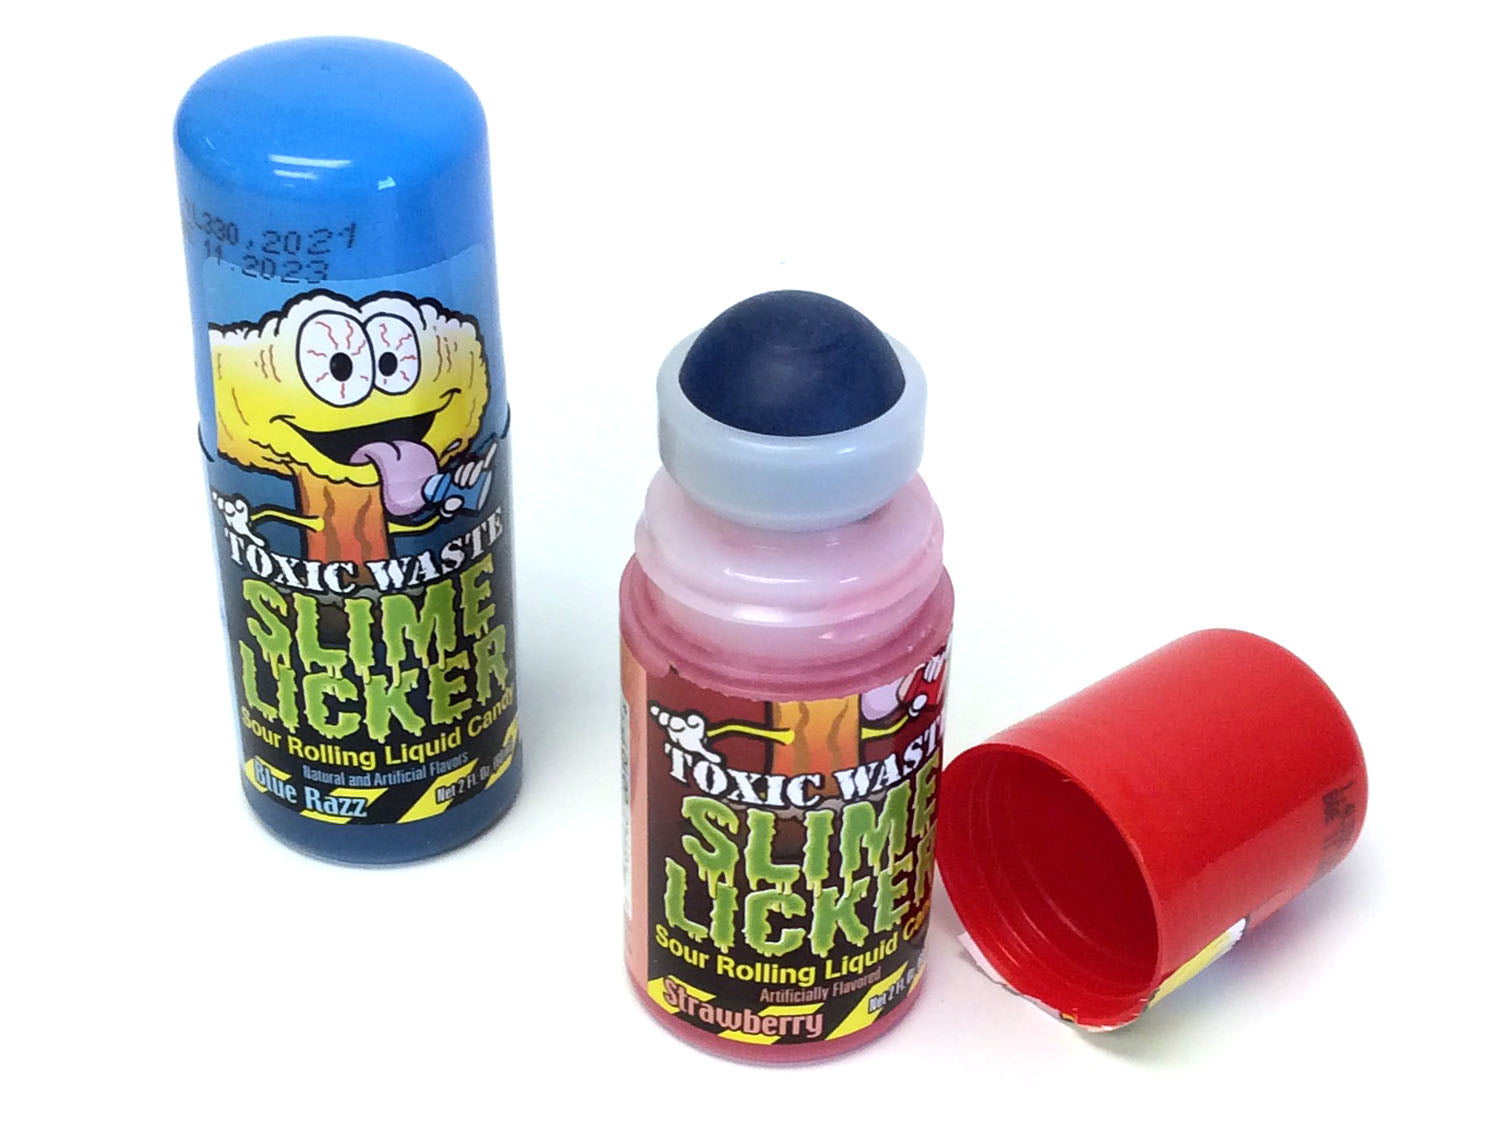 Slime lickers Toxic waste drink